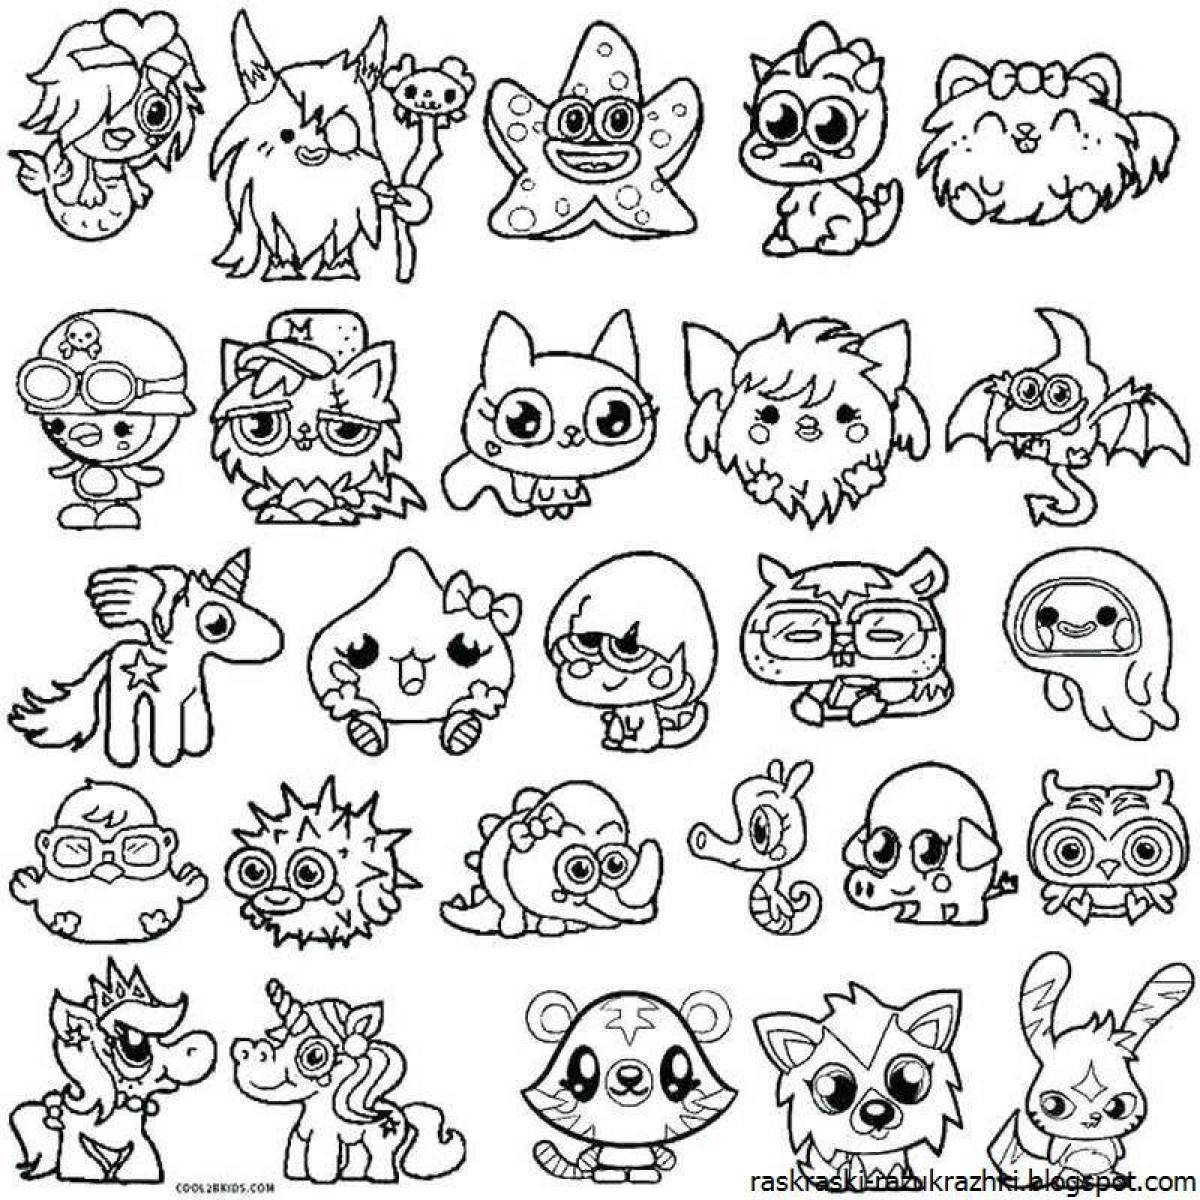 Elegant coloring pages small stickers